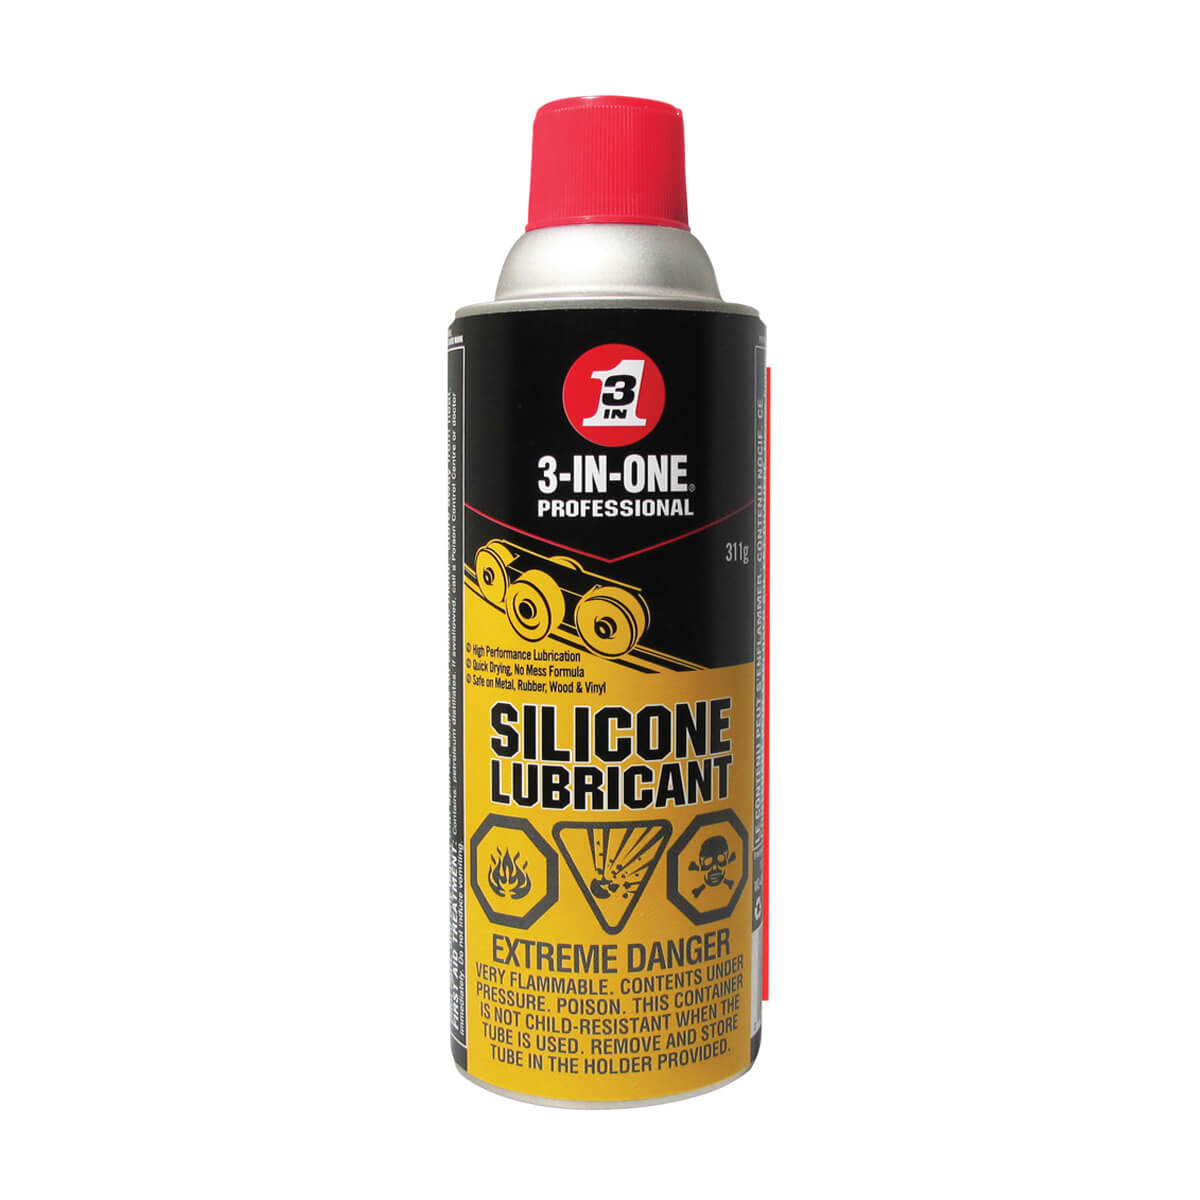 3-IN-1 Pro Silicone Lubricant - 311 g